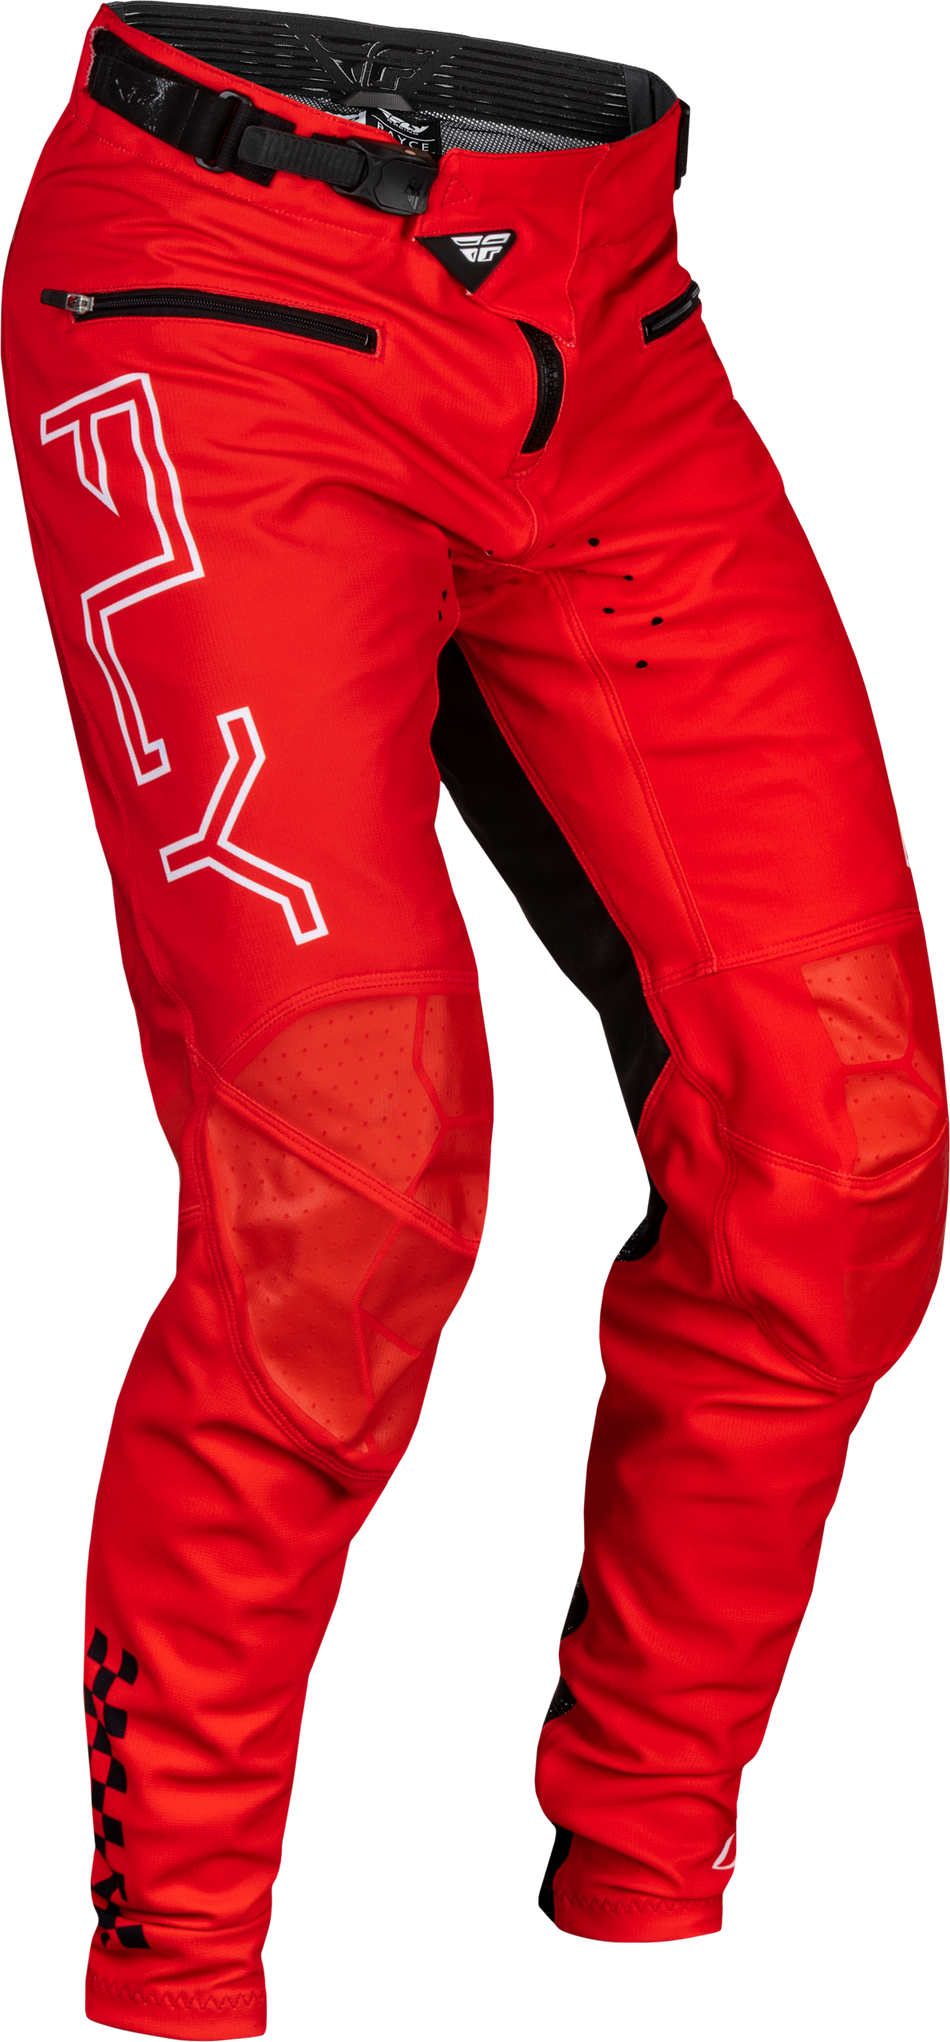 FLY RACING Youth Rayce Bicycle Pants Red Sz 22 377-06322